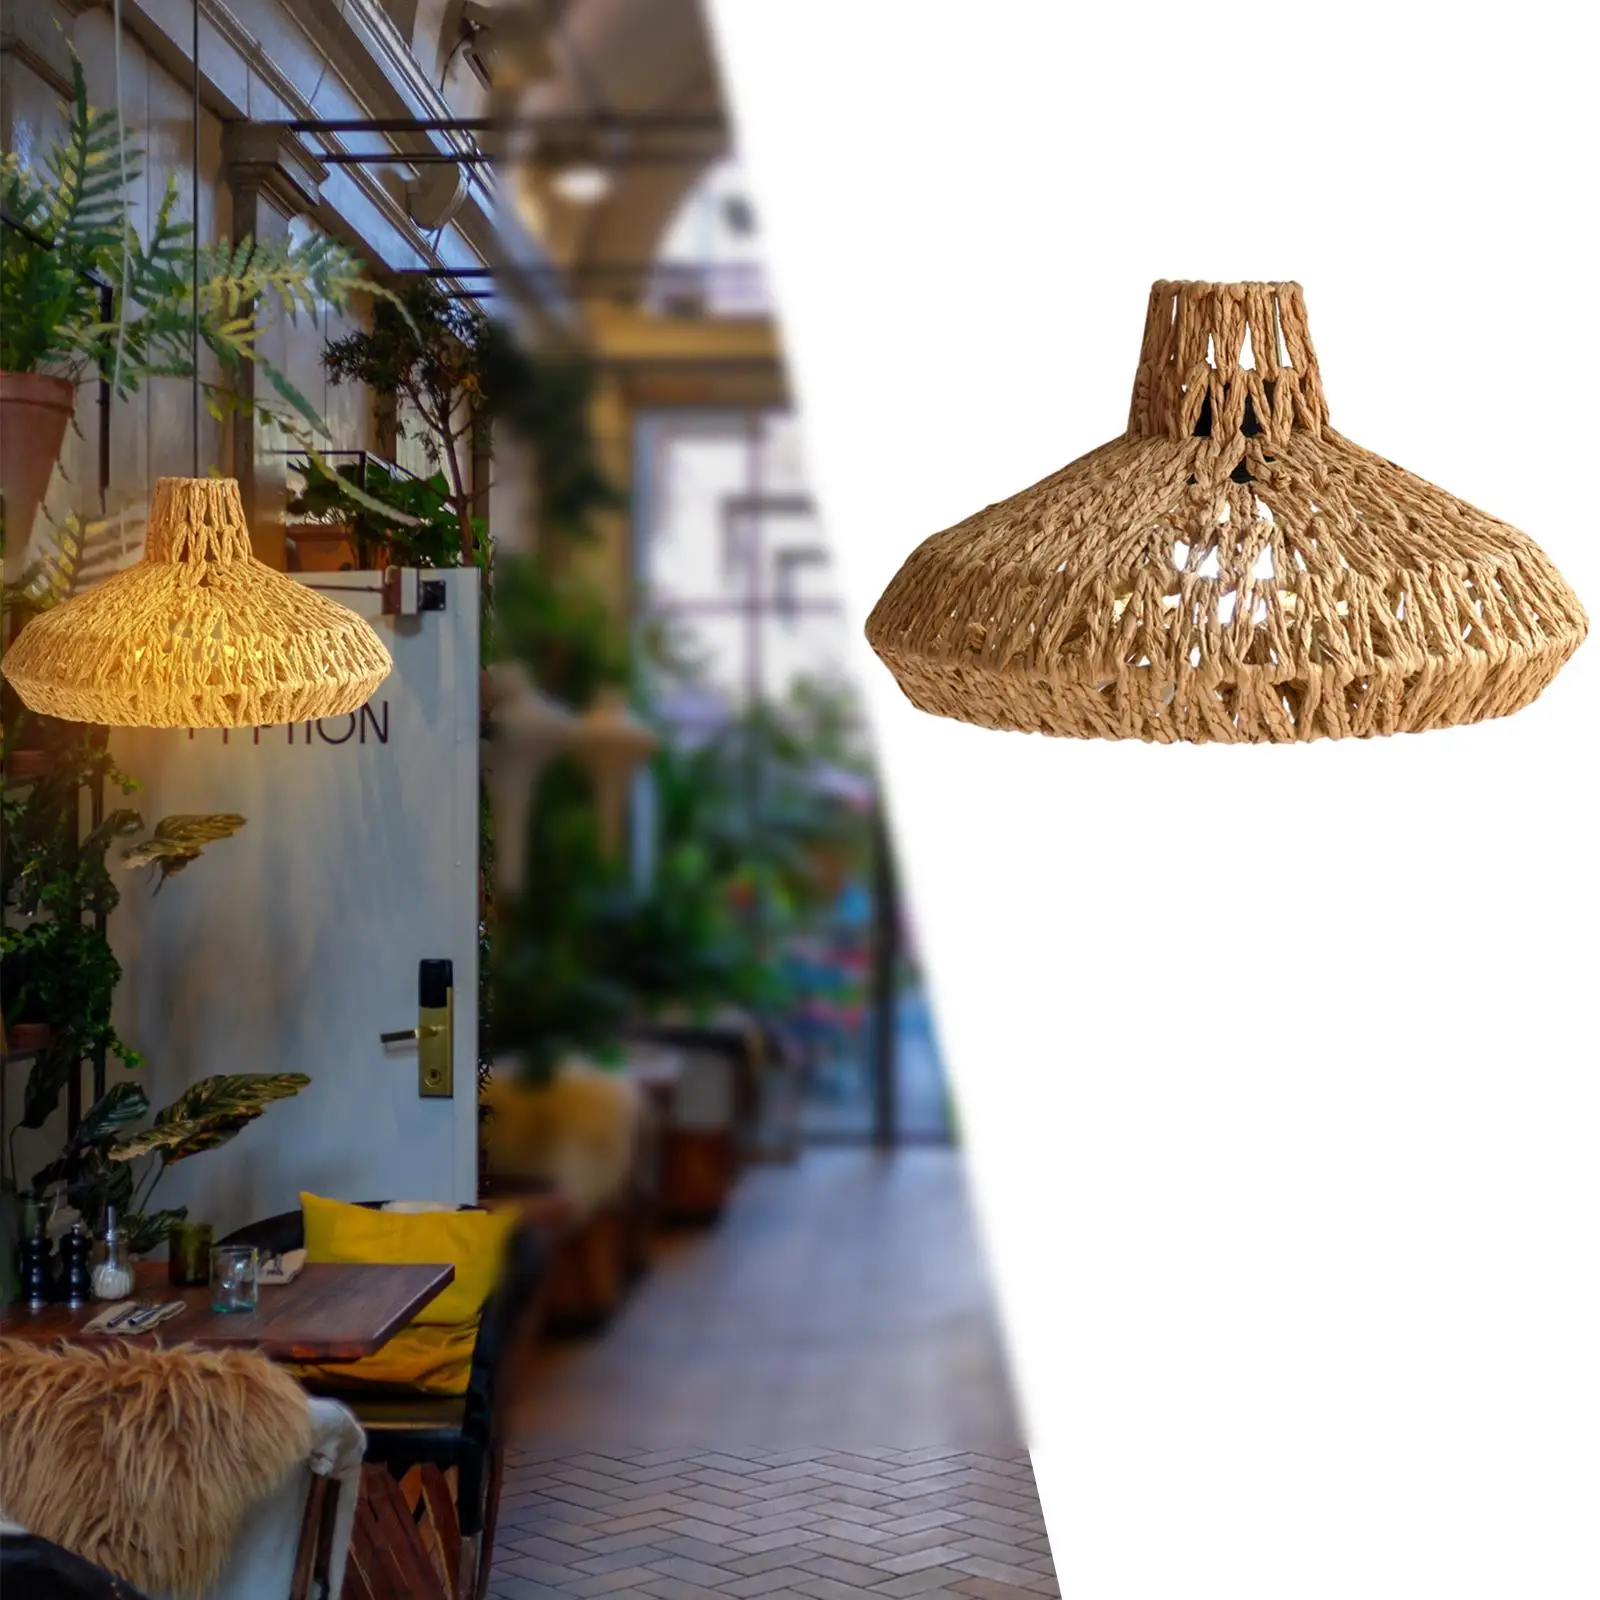 Pendant Light Shade, Rattan Basket Chandelier Lamp Shade, Weave Cage Guard, Rustic Hanging Light Fixture Teahouse